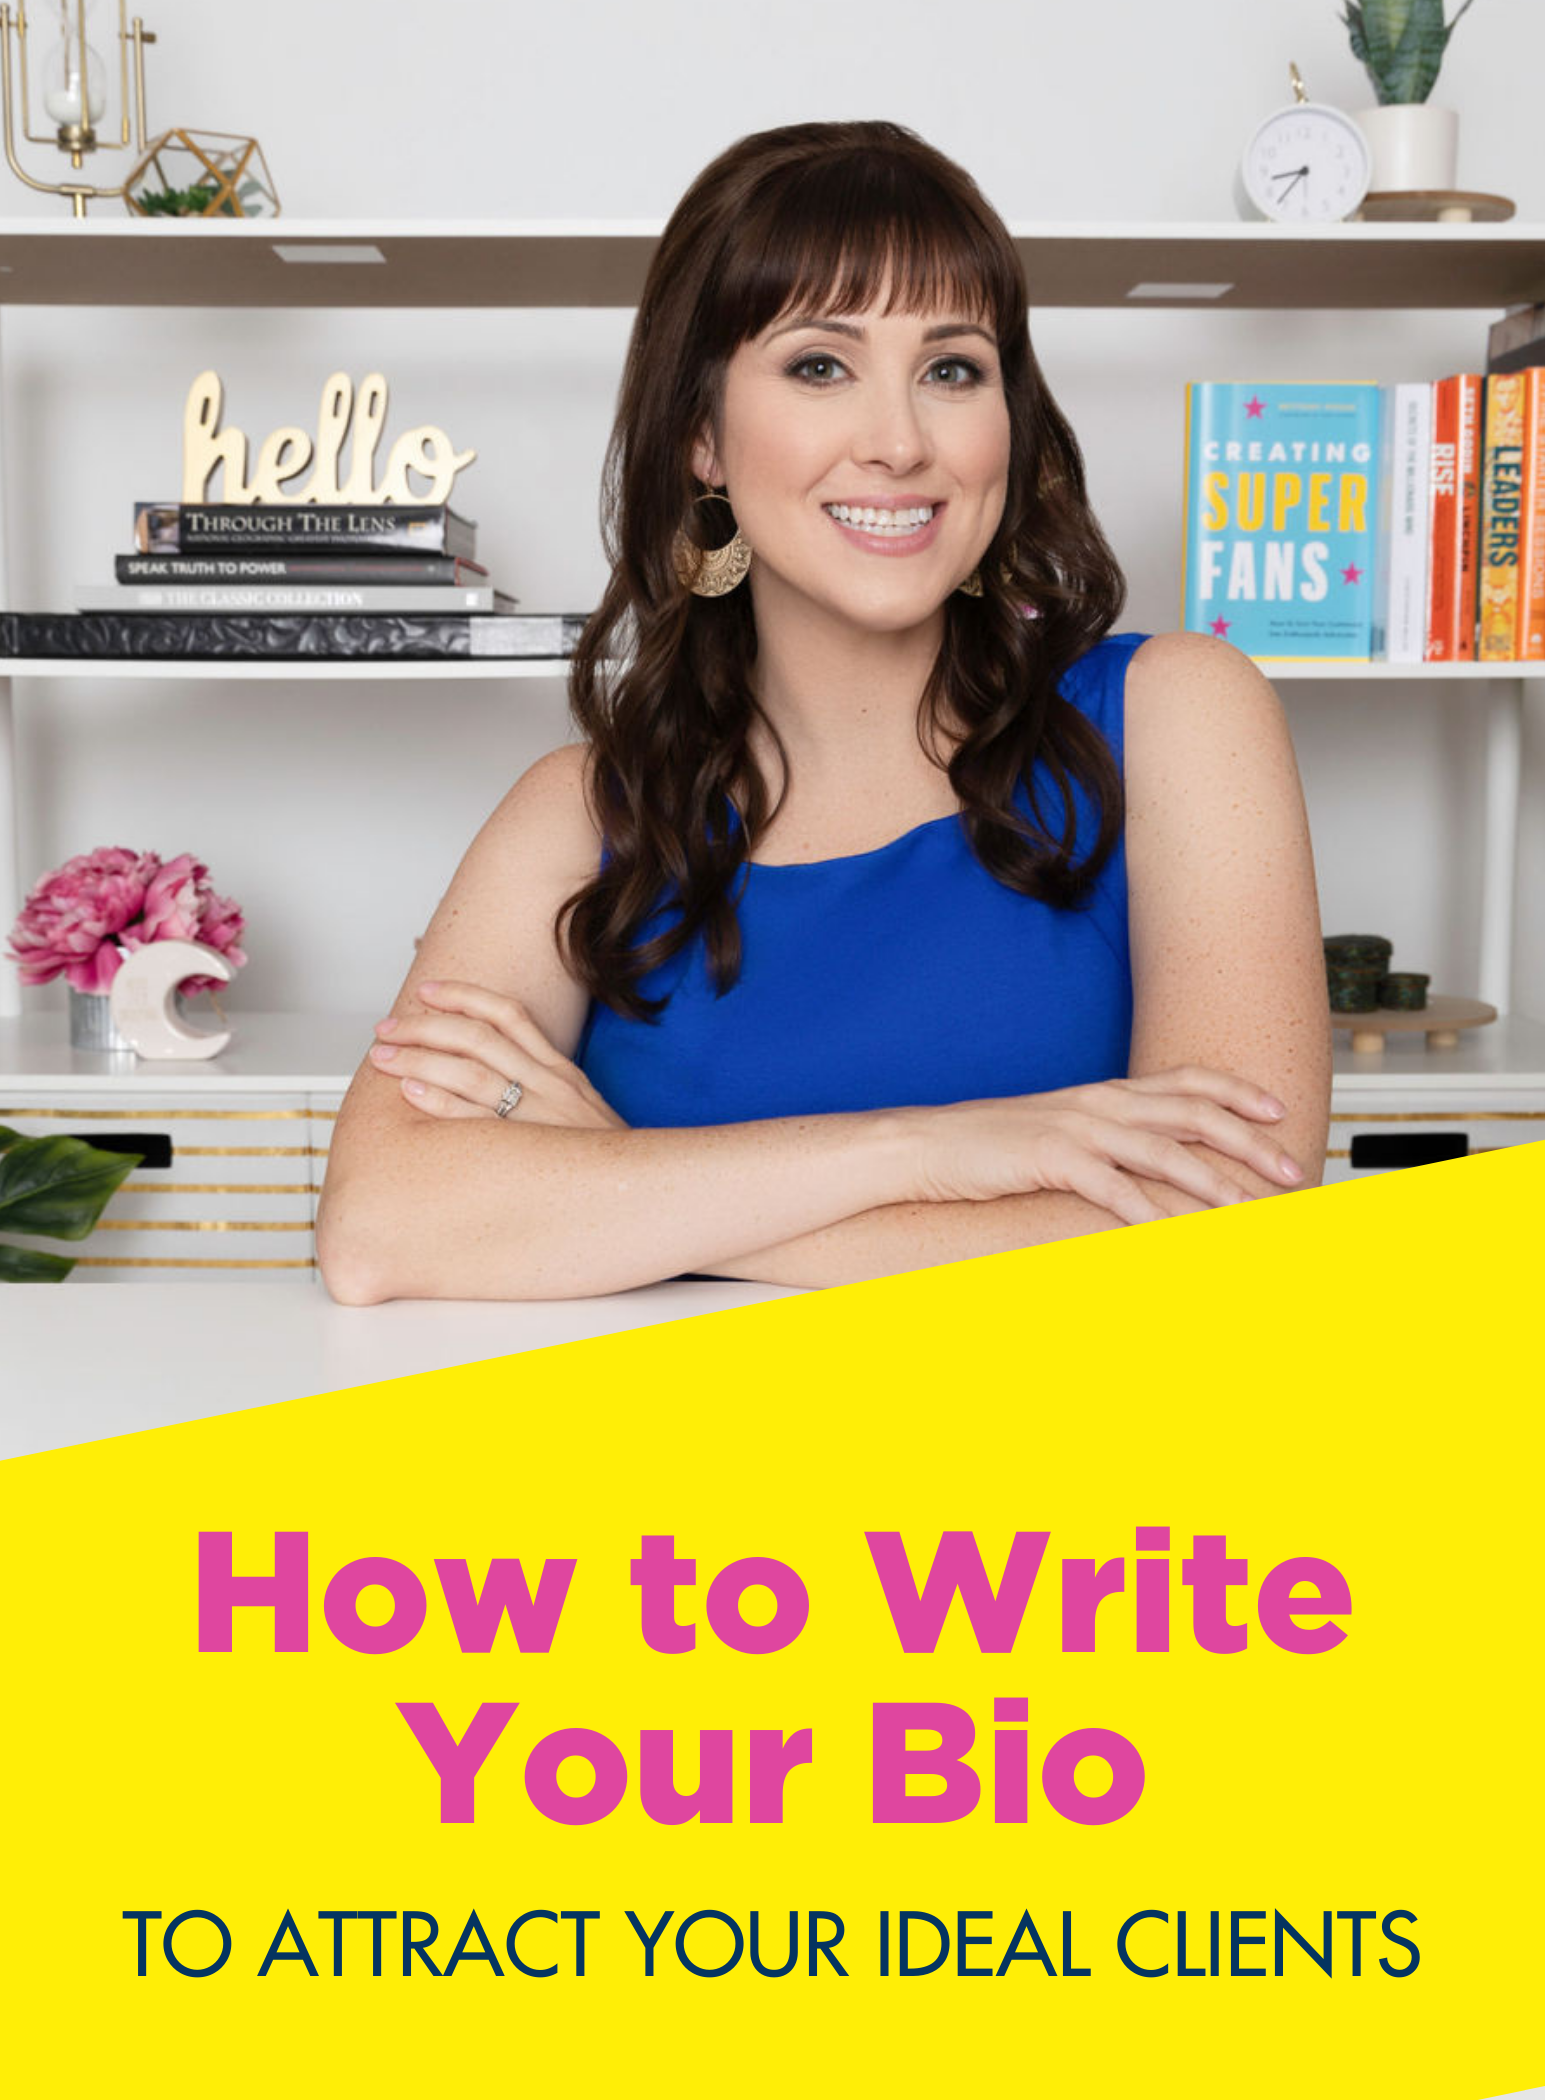 How to write your bio to attract your ideal customers - Brittany Hodak